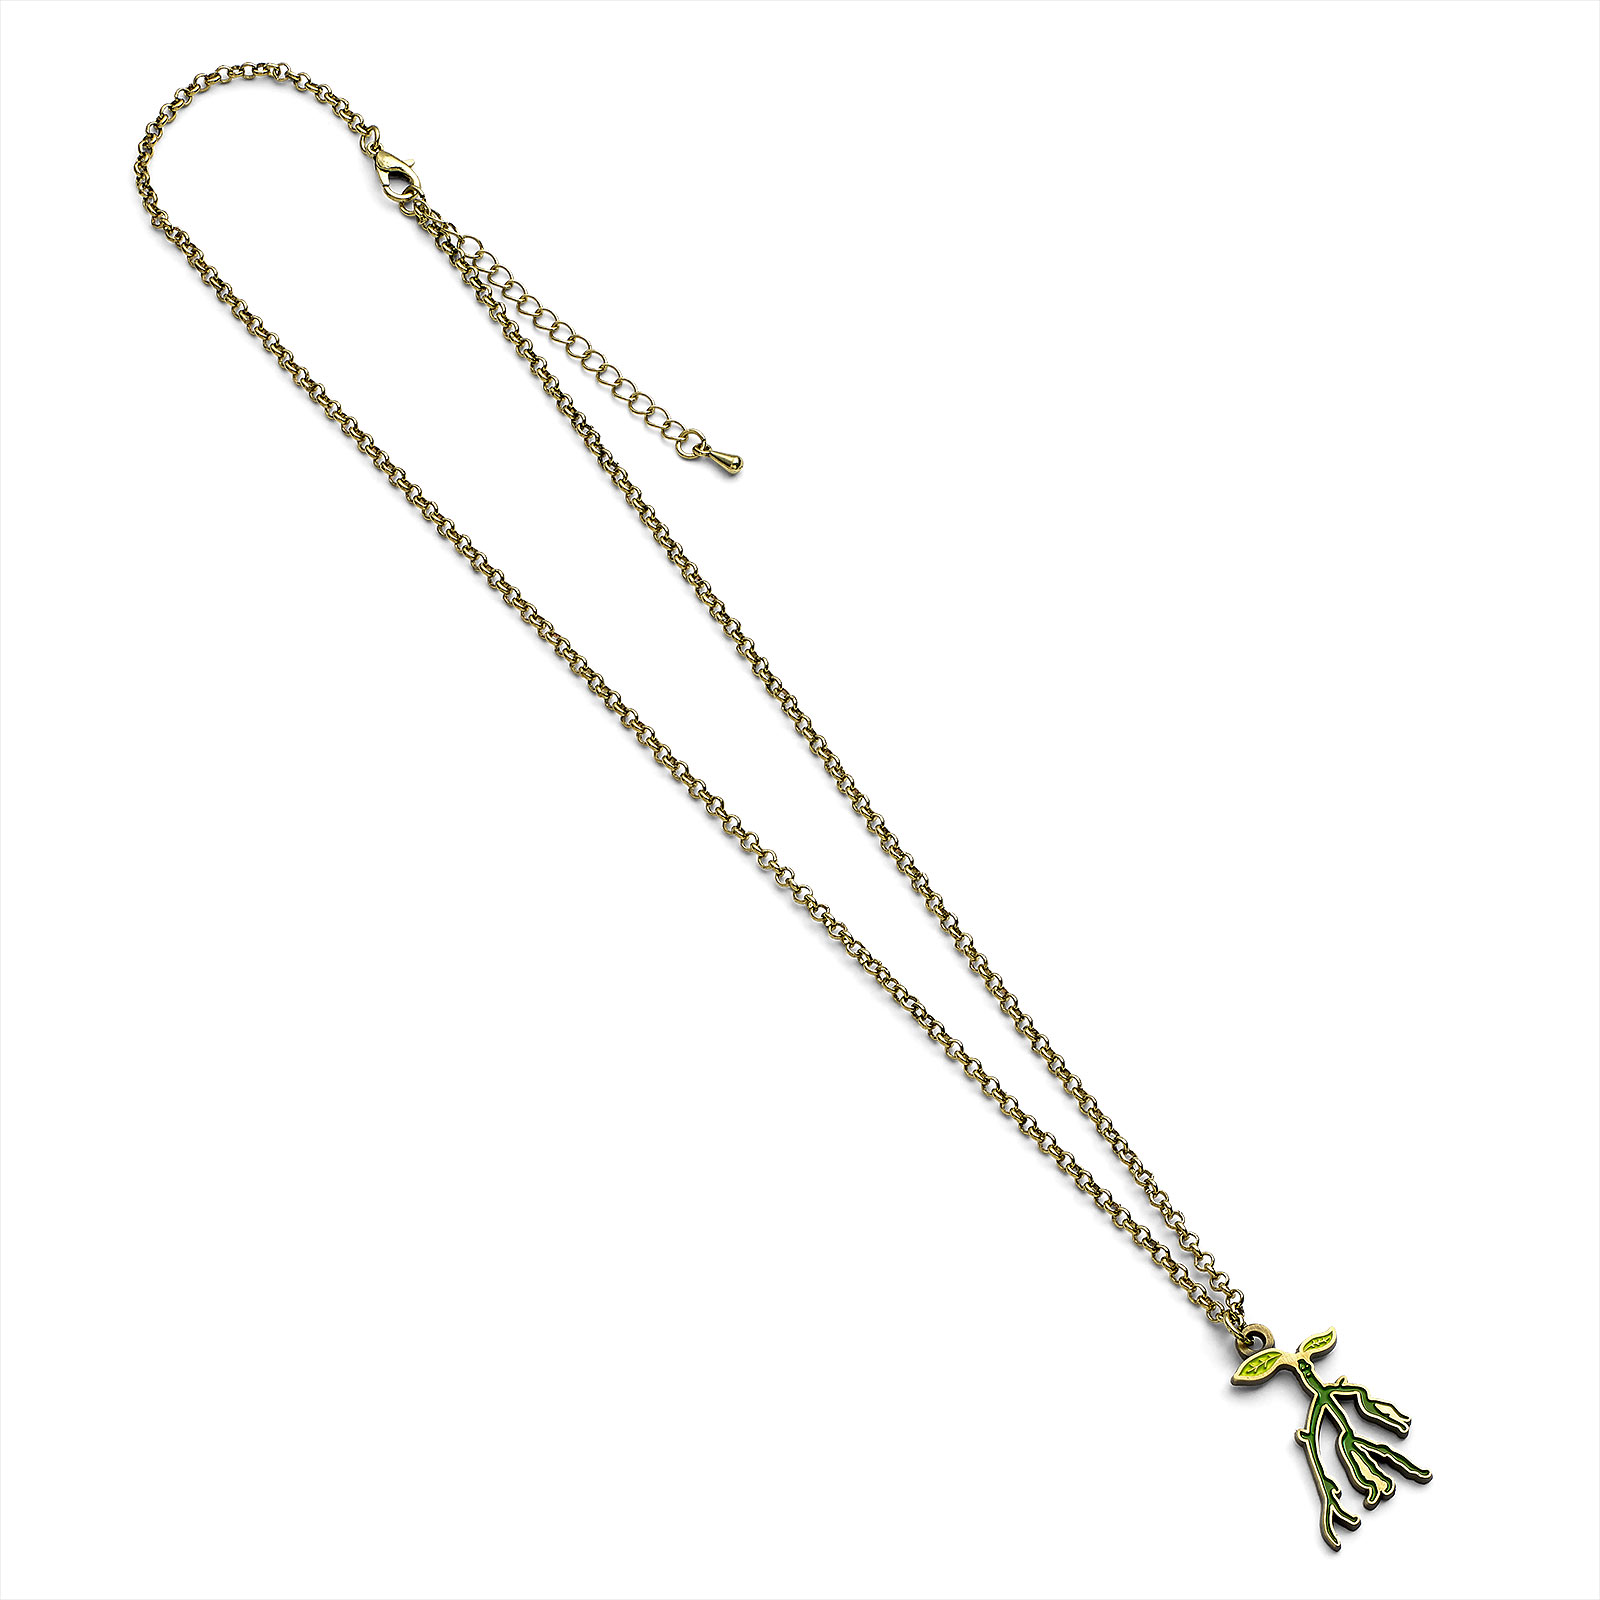 Fantastic Beasts - Bowtruckle Necklace